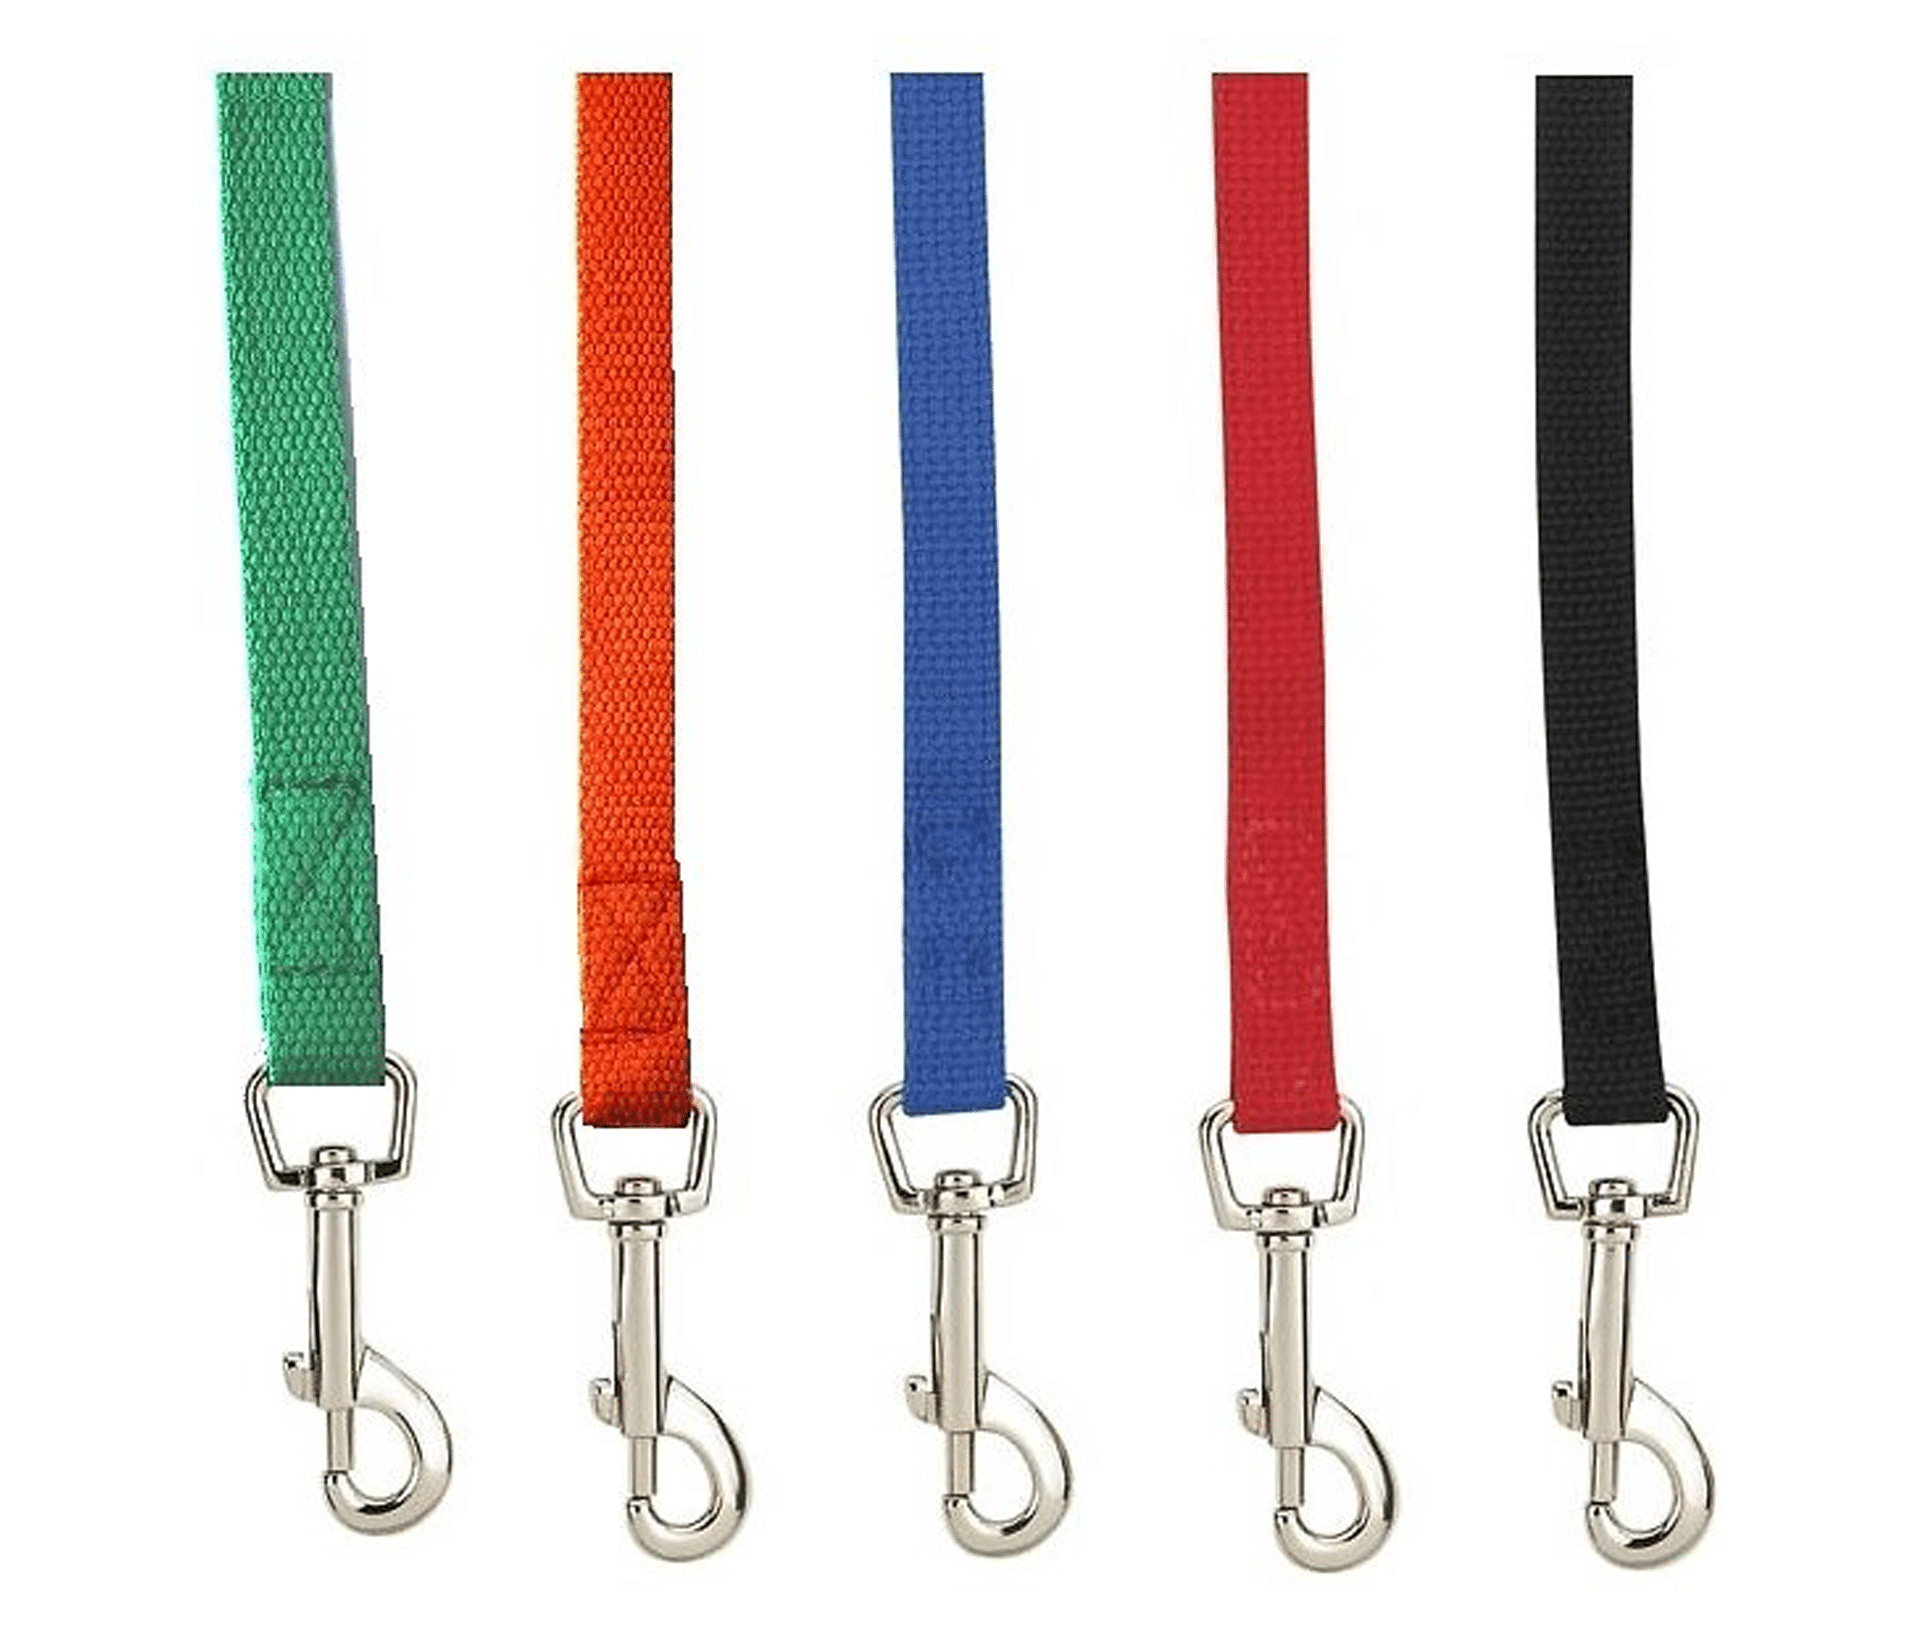 The Downtown Pet Supply Training Dog Lead